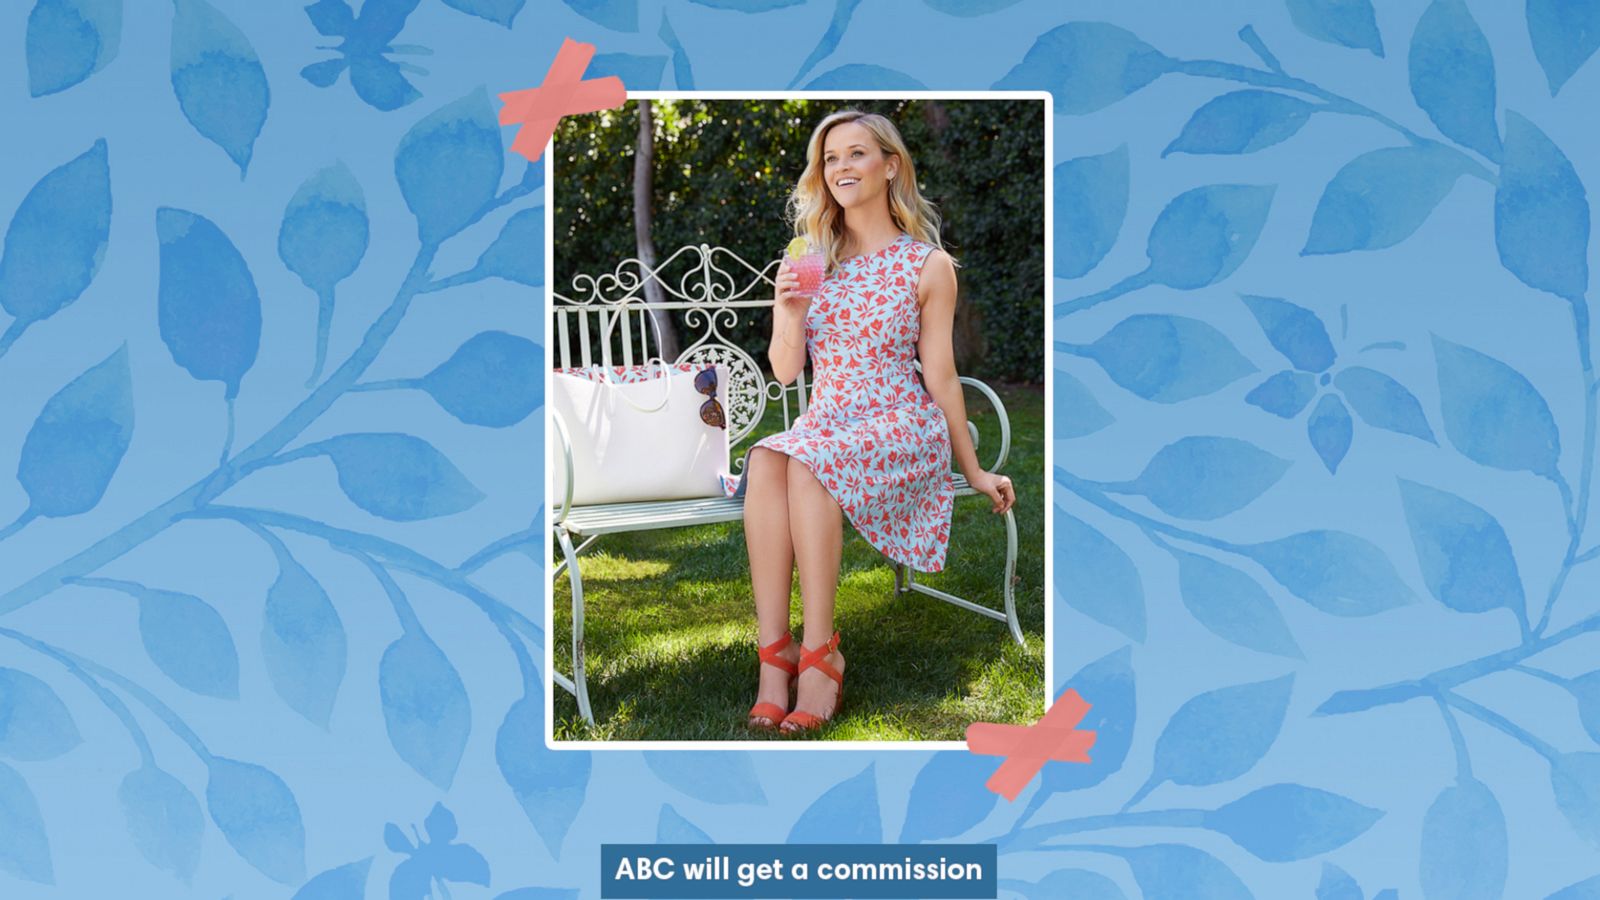 Reese Witherspoon's Draper James RSVP launched a spring fashion line